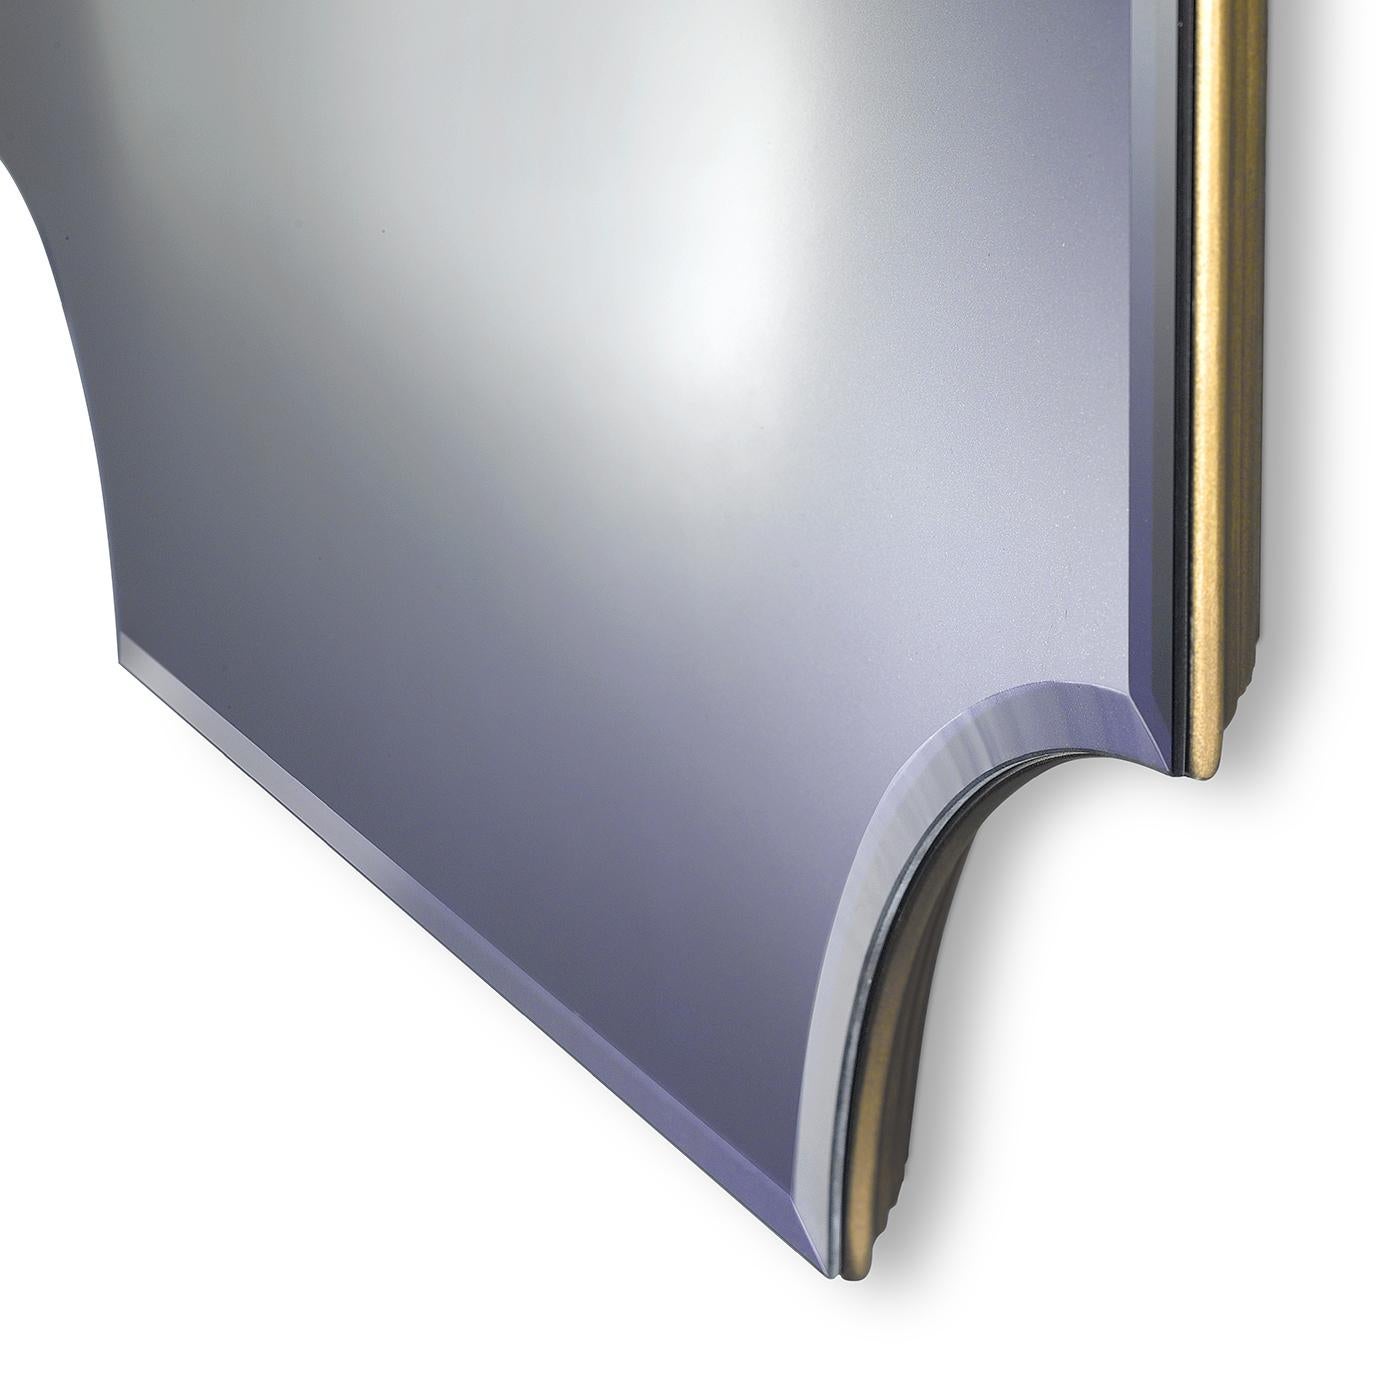 A modern and rectangular shaped mirror that features concave corners. The frame is made of wood with a riace bronze finish, however other finishes are available on request. The mirror, pictured here in purple, can be ordered in different colors.